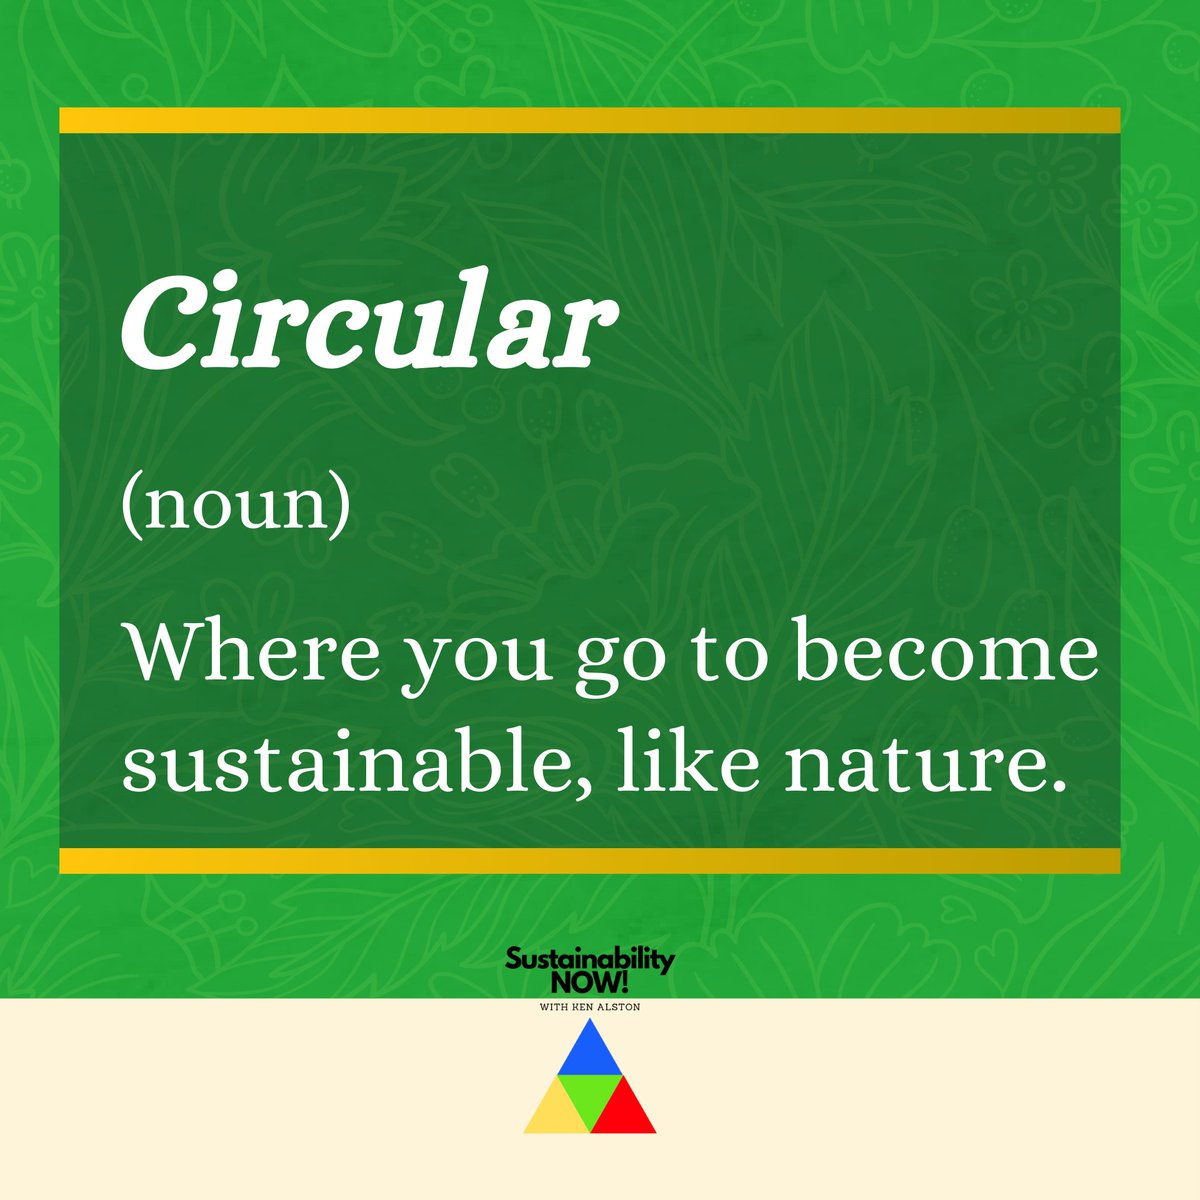 Real Circularity Academy (place) is where you go to learn how to become sustainable, like nature.

smpl.is/904b3

#RealCircularityAcademy #sustainabilityeducation #sustainableliving #circulareconomy #environmentaleducation